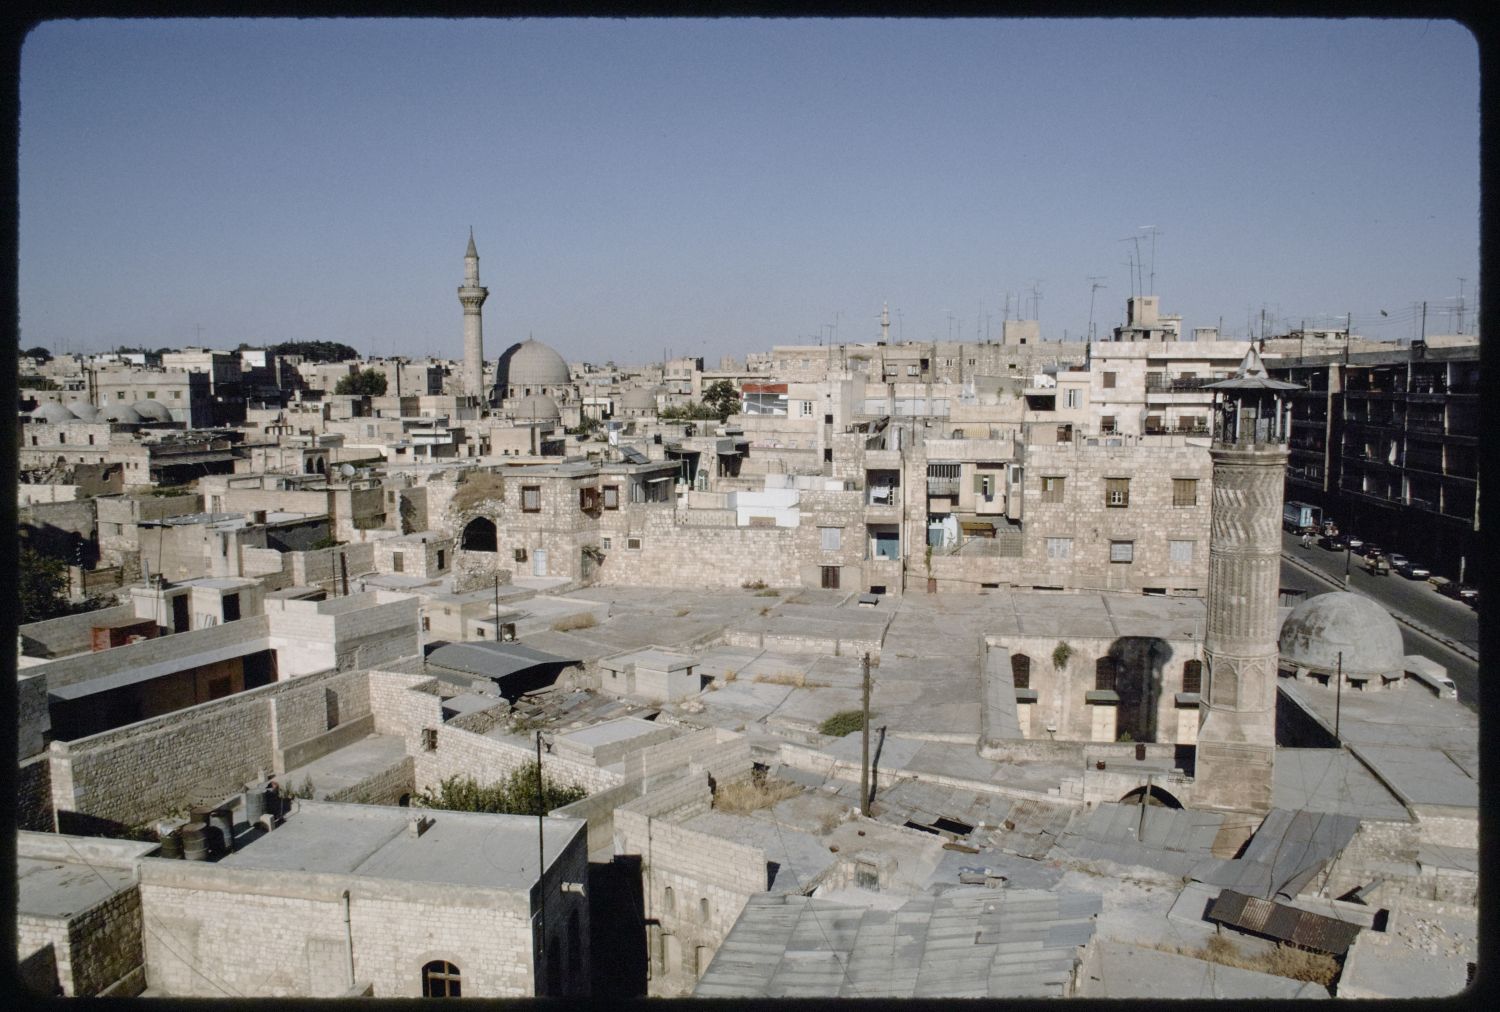 View over urban fabric of old Aleppo along the north side of al-Mutanabbi Street. The minaret of&nbsp;<a href="http://archnet.org/sites/1812" target="_blank" data-bypass="true">Jami' al-Mihmandar</a>&nbsp;is visible in foreground, and the dome and minaret of&nbsp;<a href="http://archnet.org/sites/3546" target="_blank" data-bypass="true">al-Madrasa al-Uthmaniyya</a>&nbsp; in background.